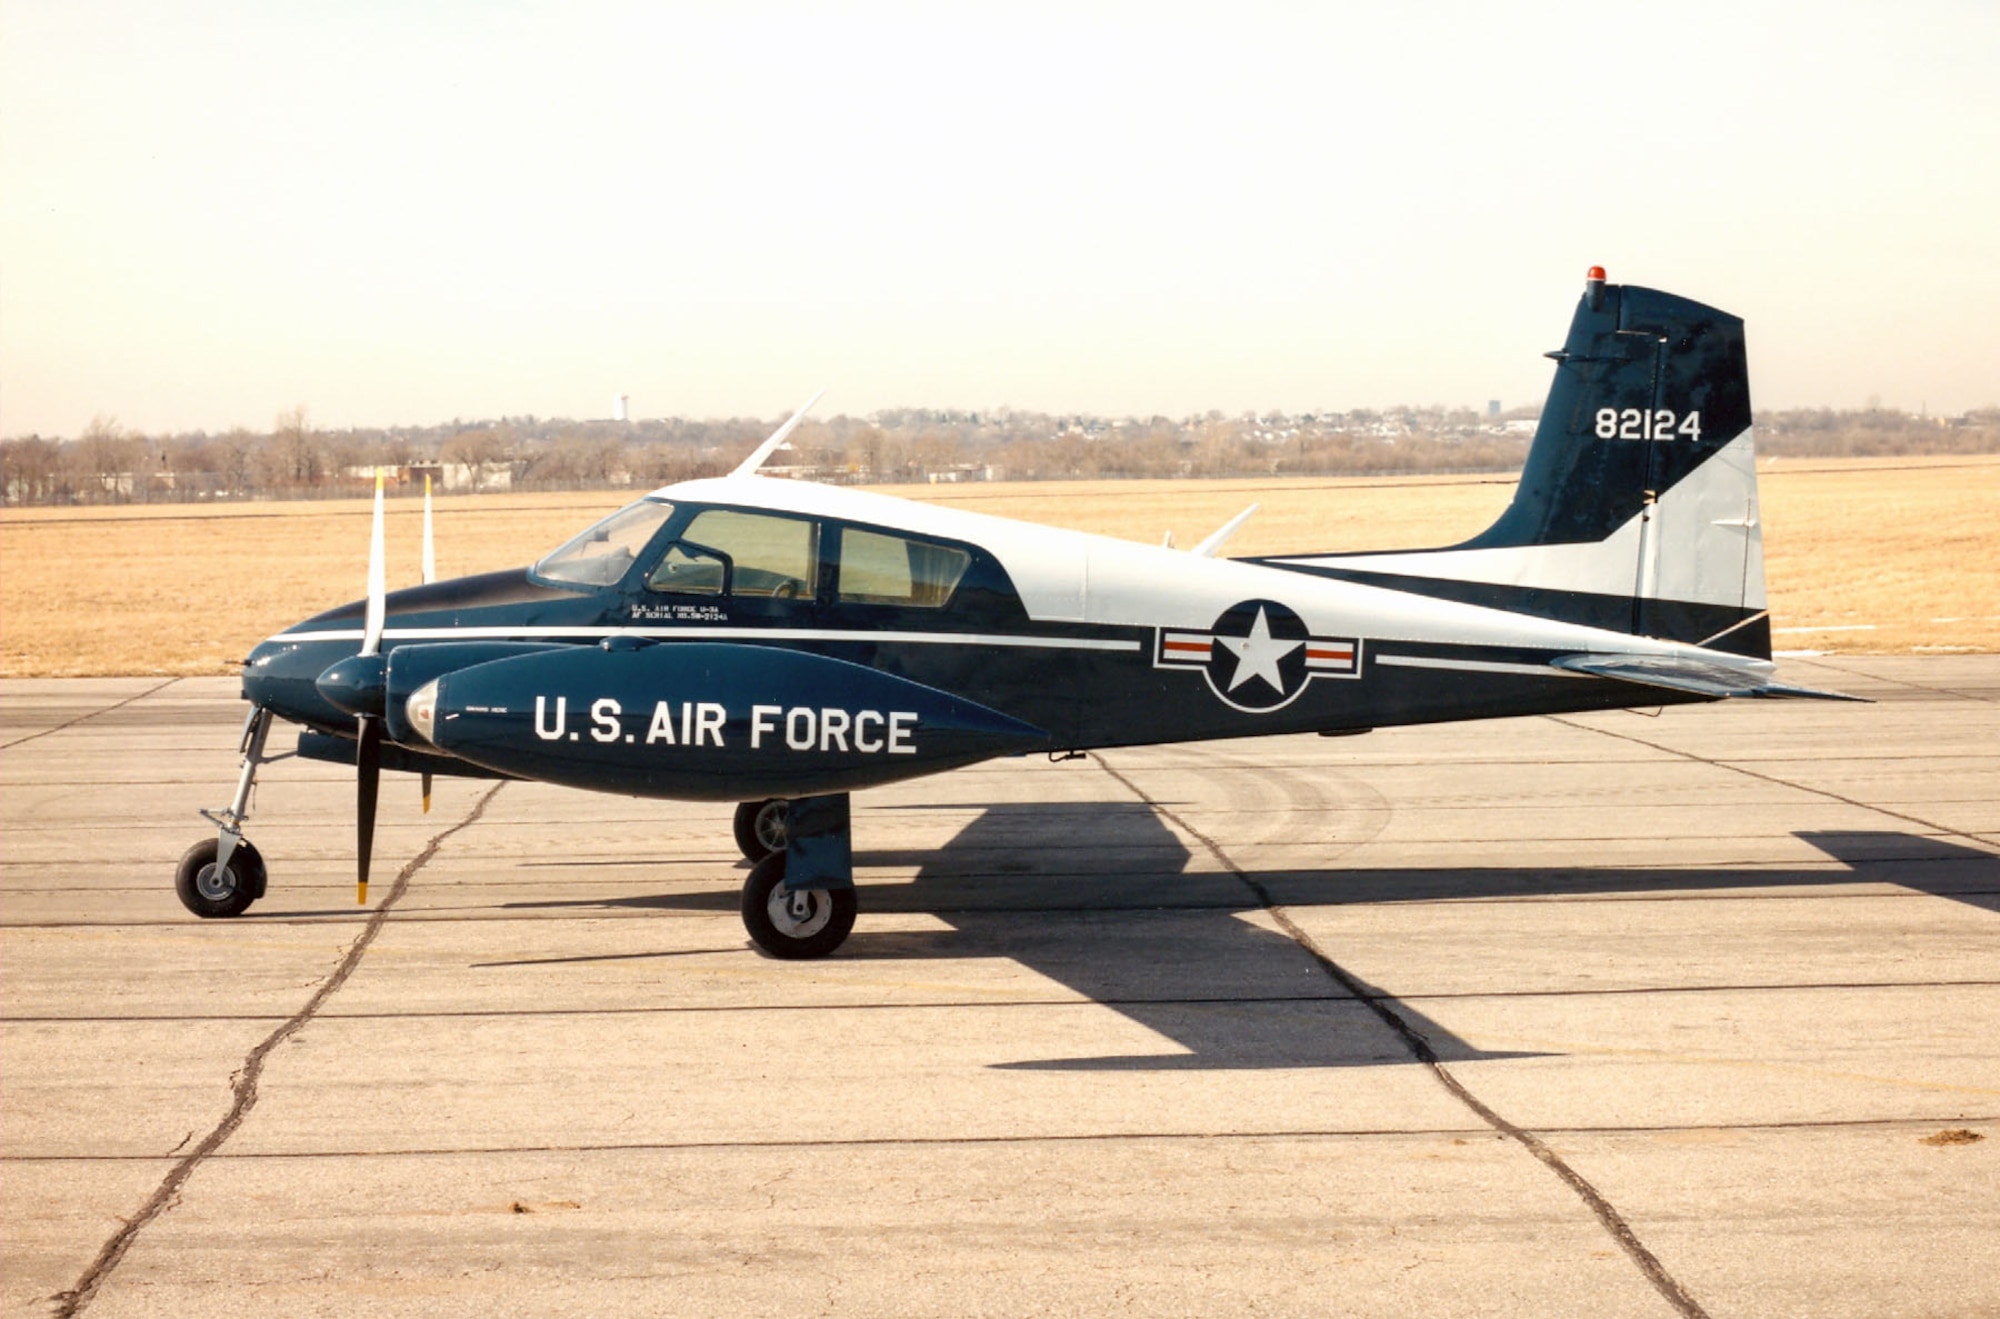 DAYTON, Ohio -- Cessna U-3A at the National Museum of the United States Air Force. (U.S. Air Force photo)